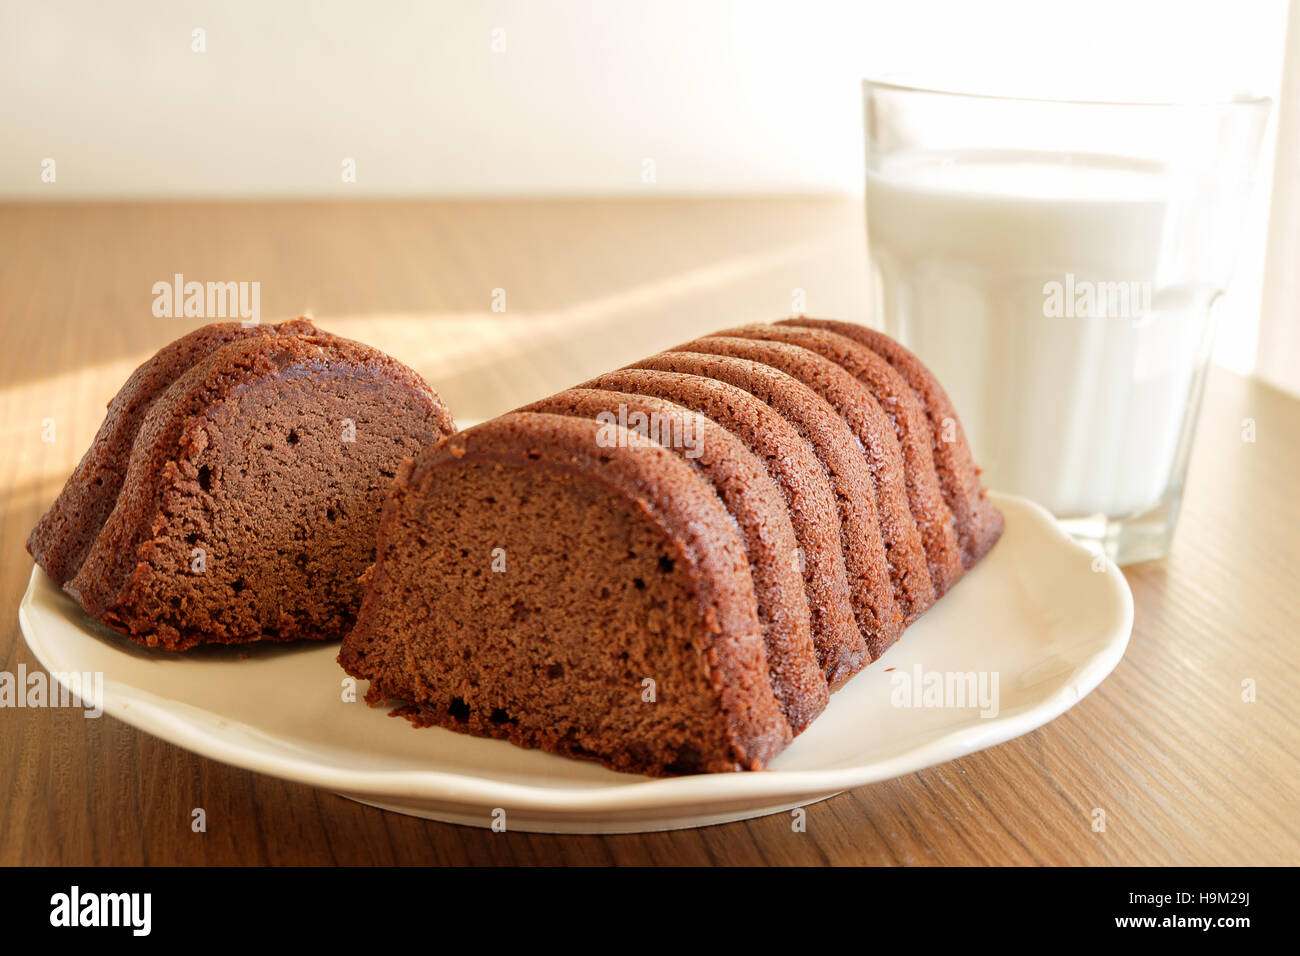 Chocolate Loaf cake and milk on a plate as snack or breakfast, selective focus Stock Photo